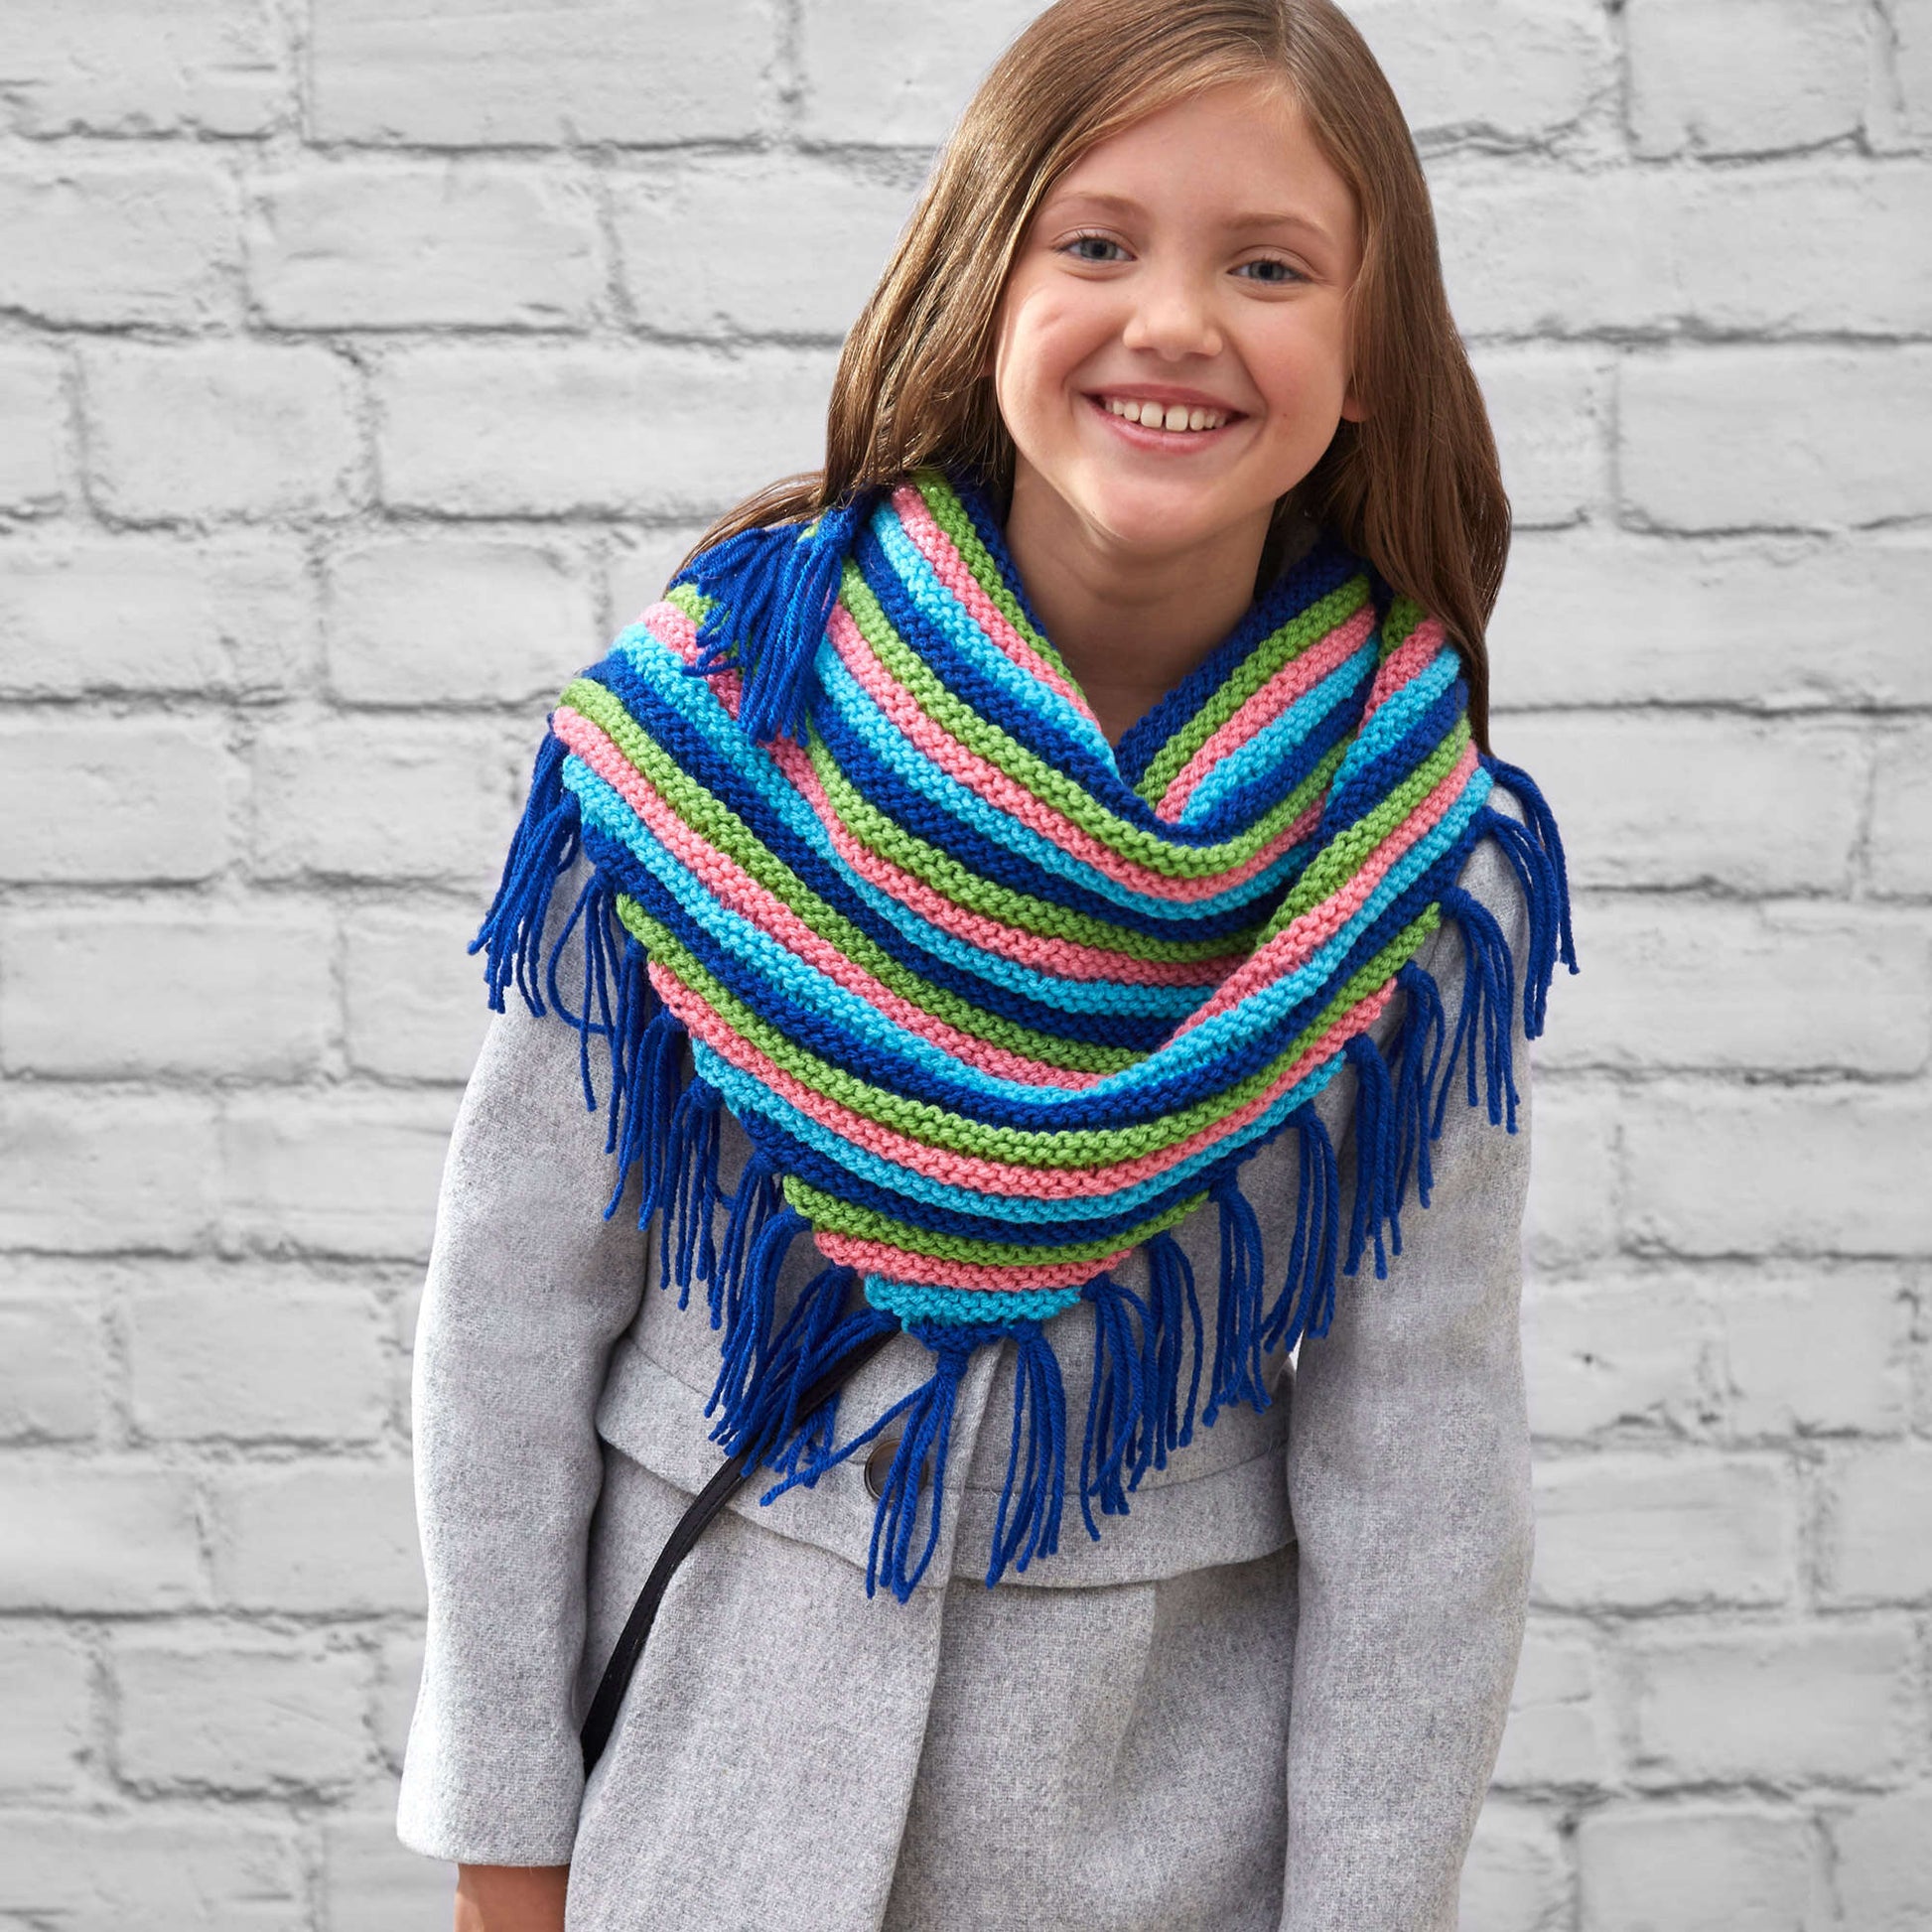 Free Red Heart Girls' Fringed Scarf Pattern